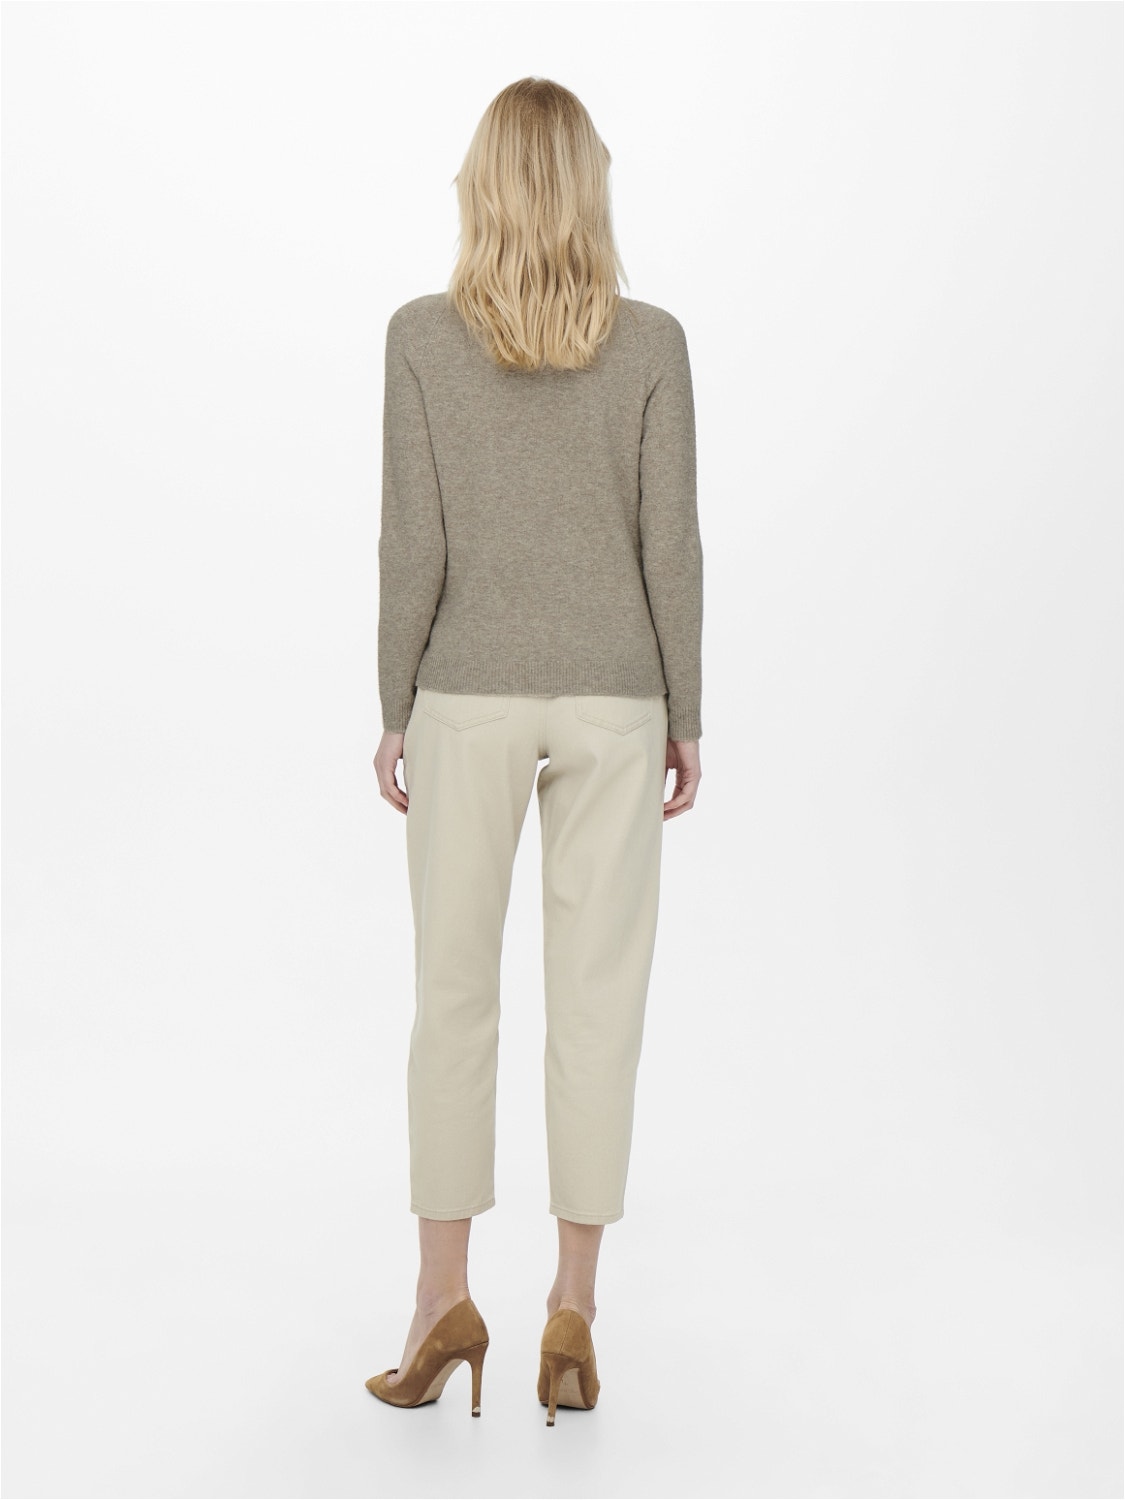 ONLY o-neck knitted pullover -Beige - 15204279